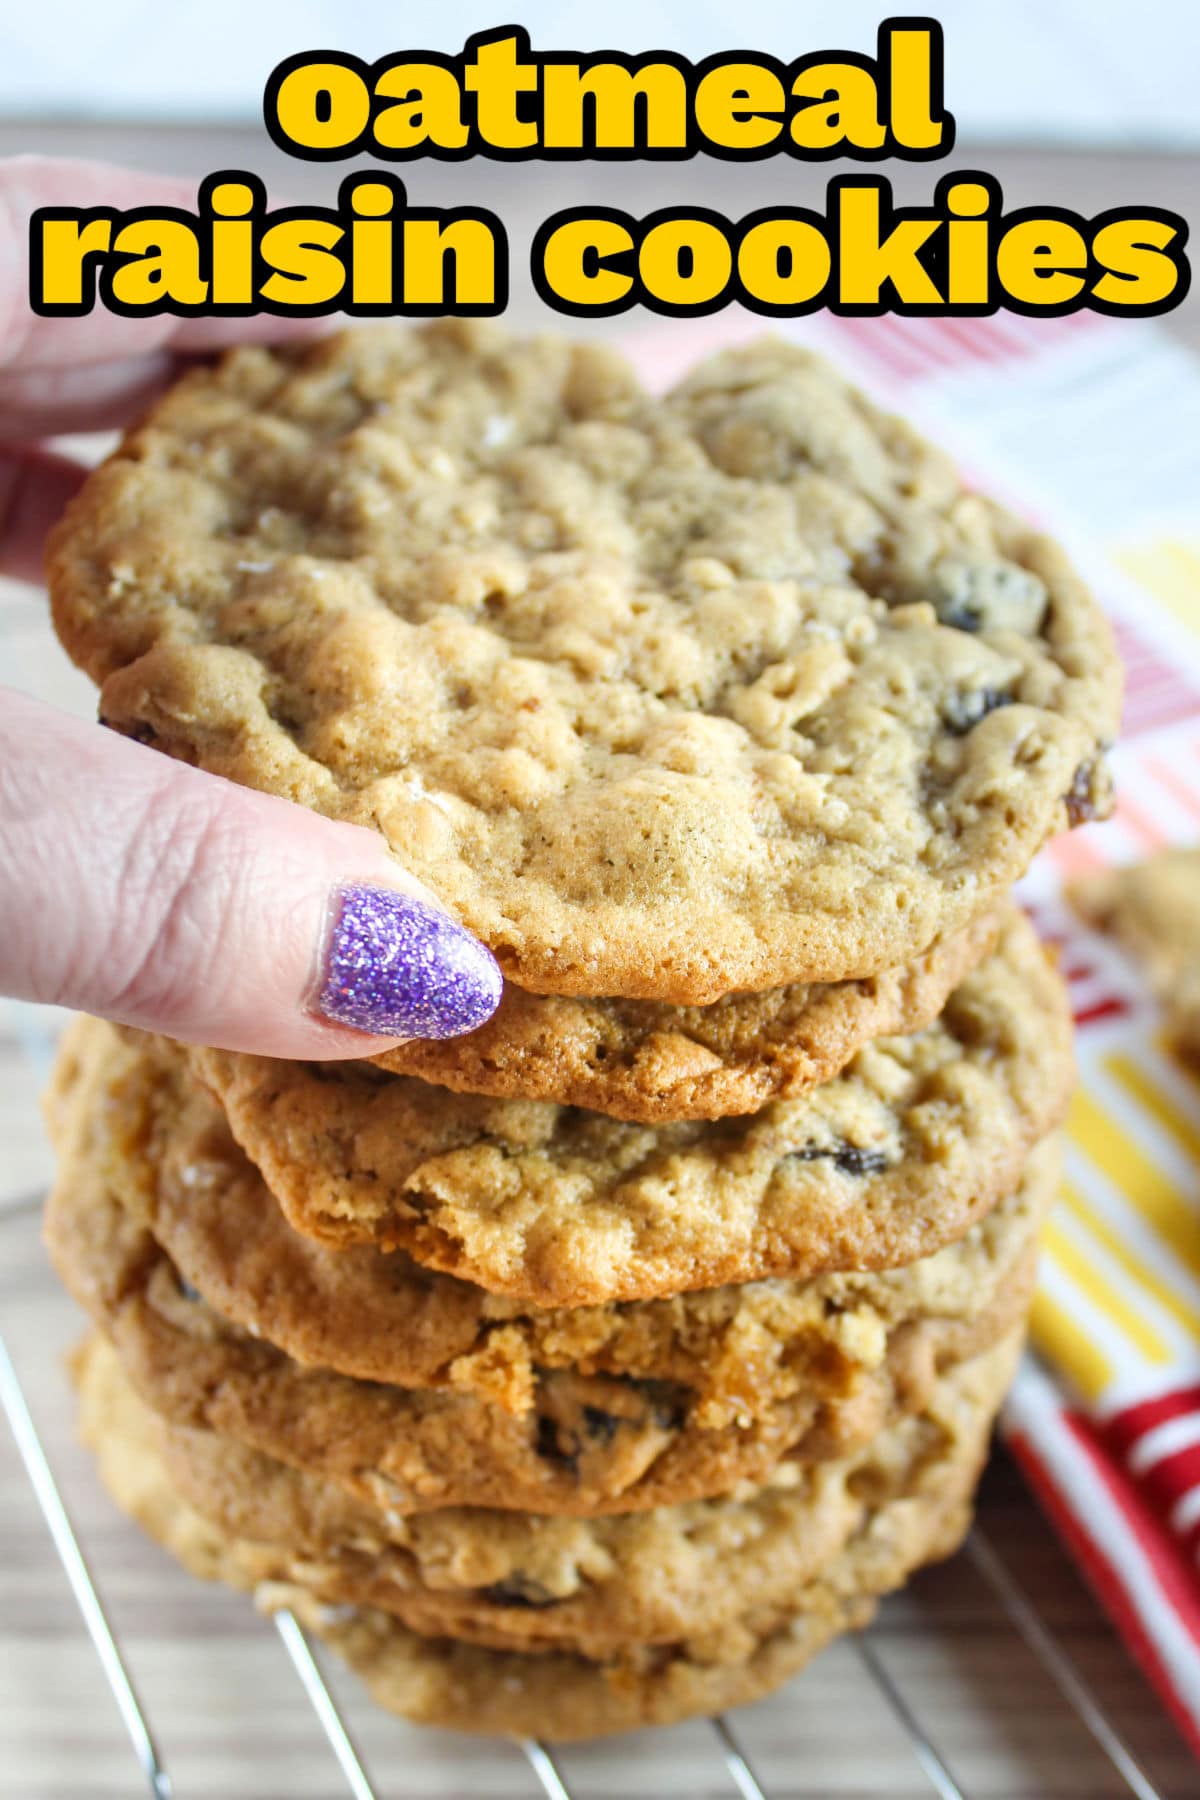 These Bakery Style Oatmeal Raisin Cookies are tasty, chewy, bakery-style cookies. They look, act and taste like they were made in a gourmet bakery. This dough is so simple to make and only takes about 10 minutes. via @foodhussy